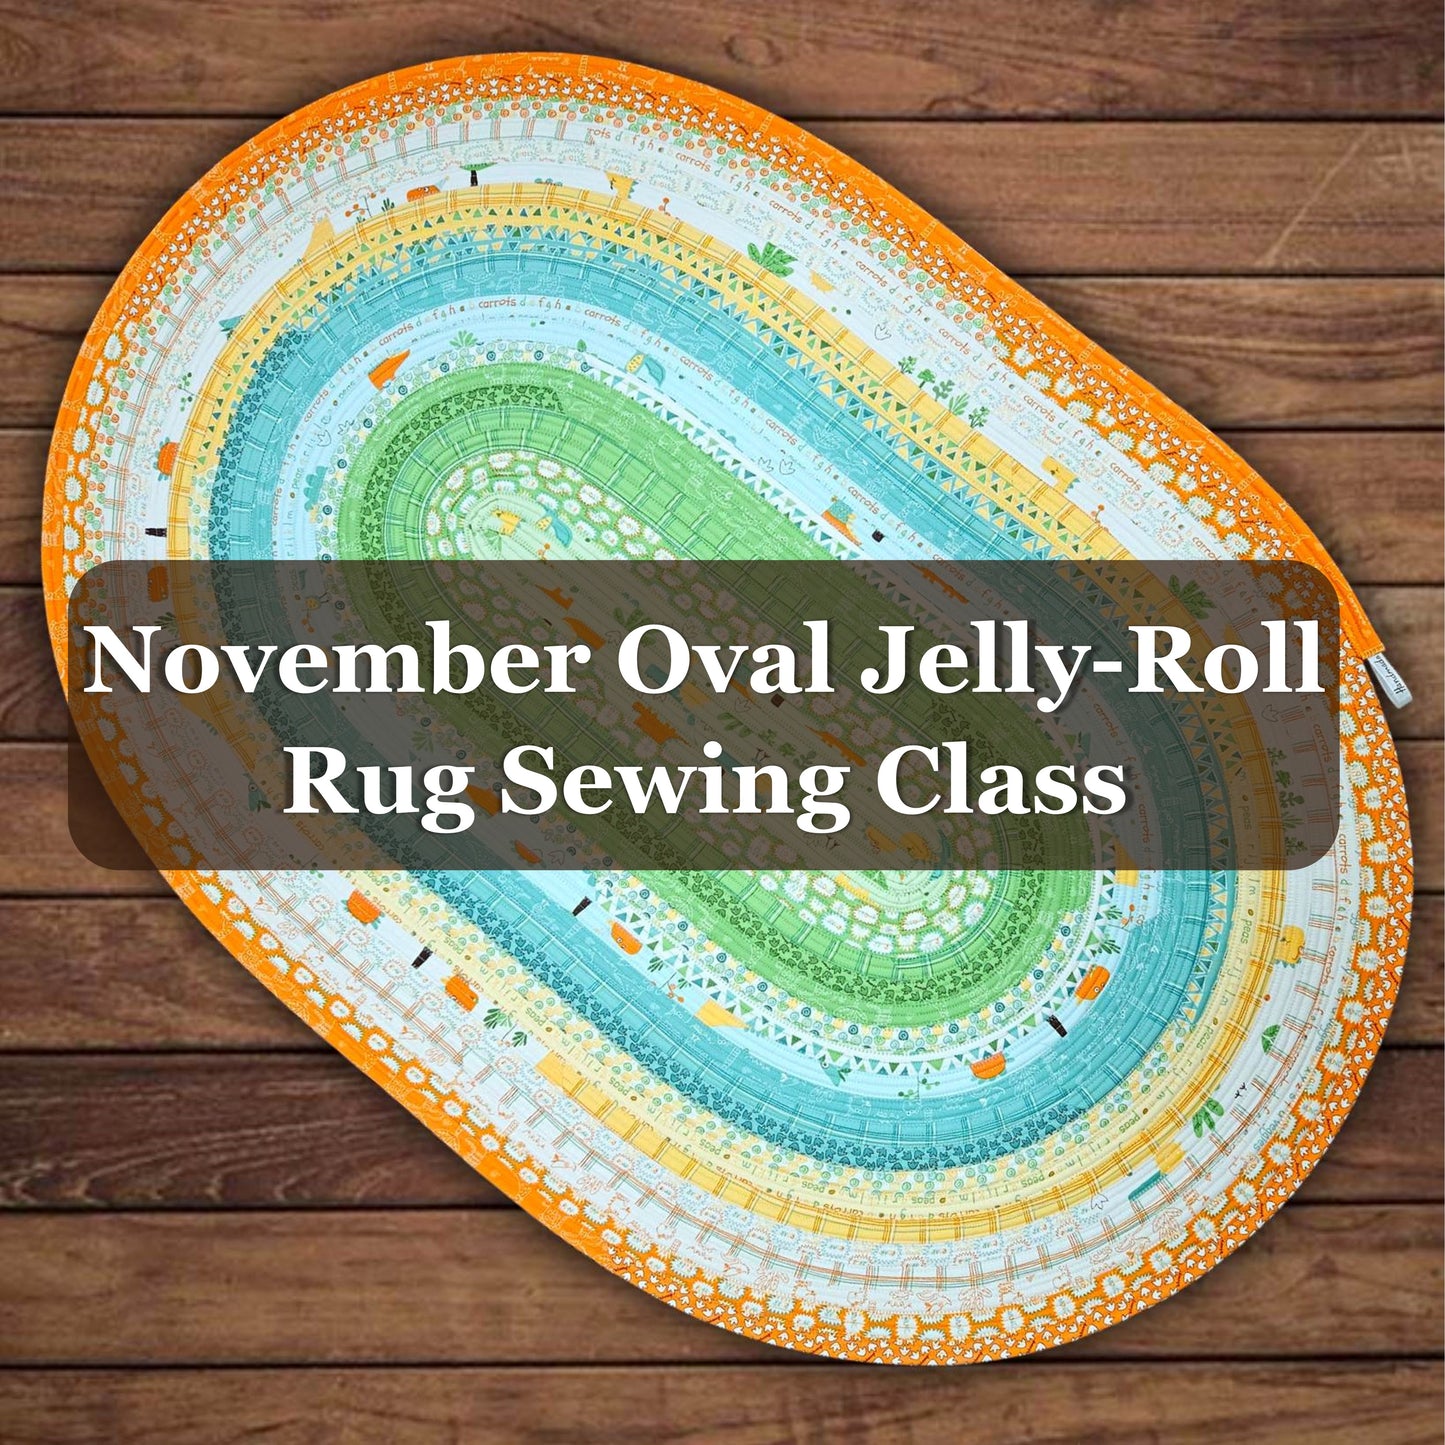 November Oval Jelly-Roll Rug Sewing Class